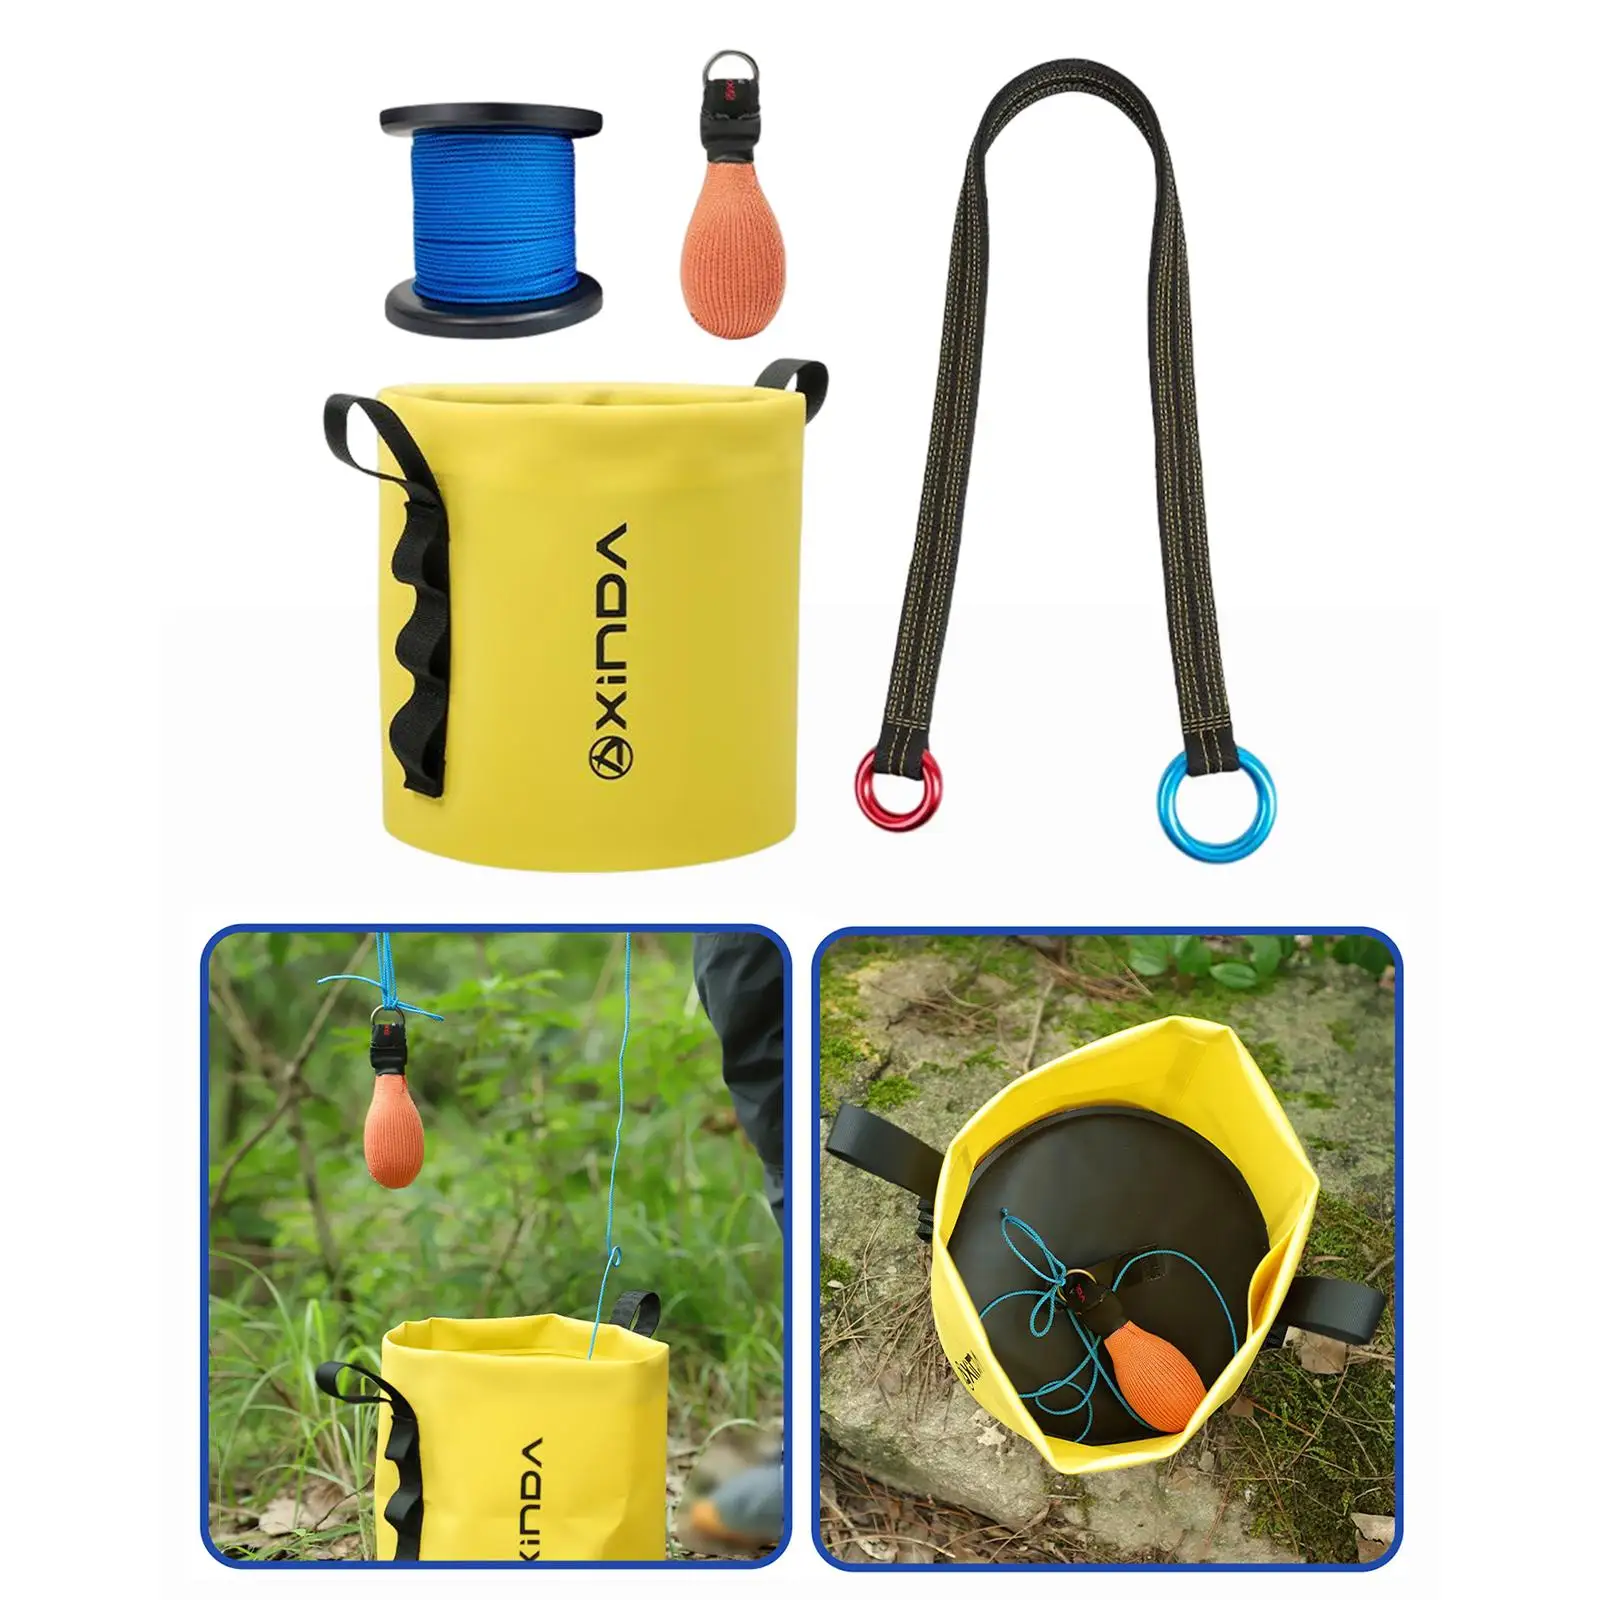 4x Arborist Throw Line Kit and Rope Storage Bag Straps Throw Weight Portable Durable Throwline for Outdoor Sports Backpacking